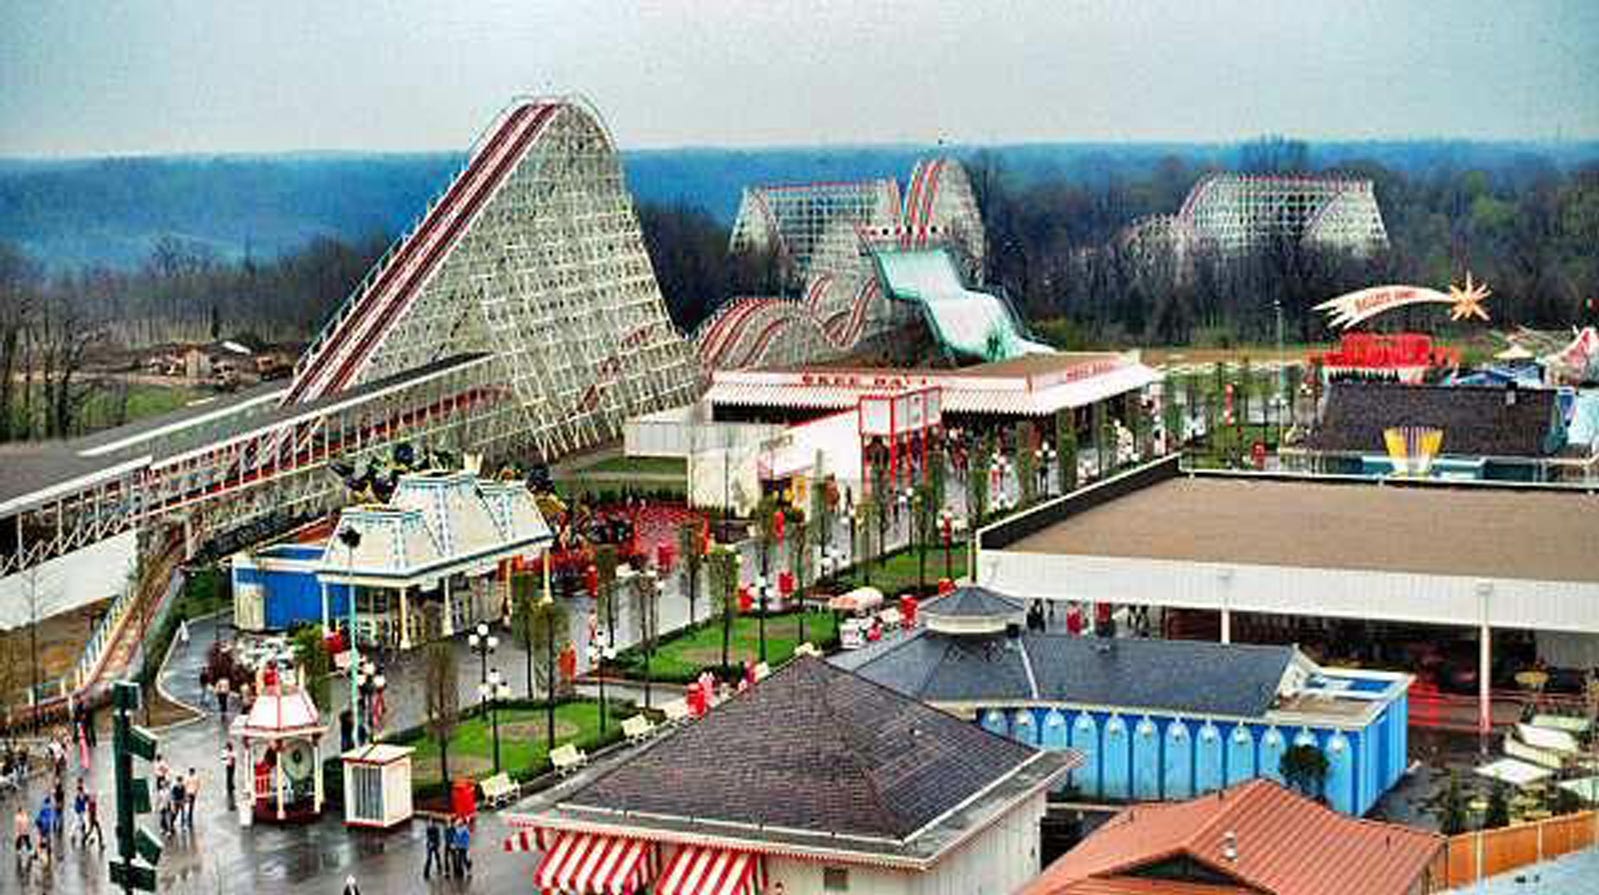 Today in History, April 29, 1972 Kings Island held grand opening